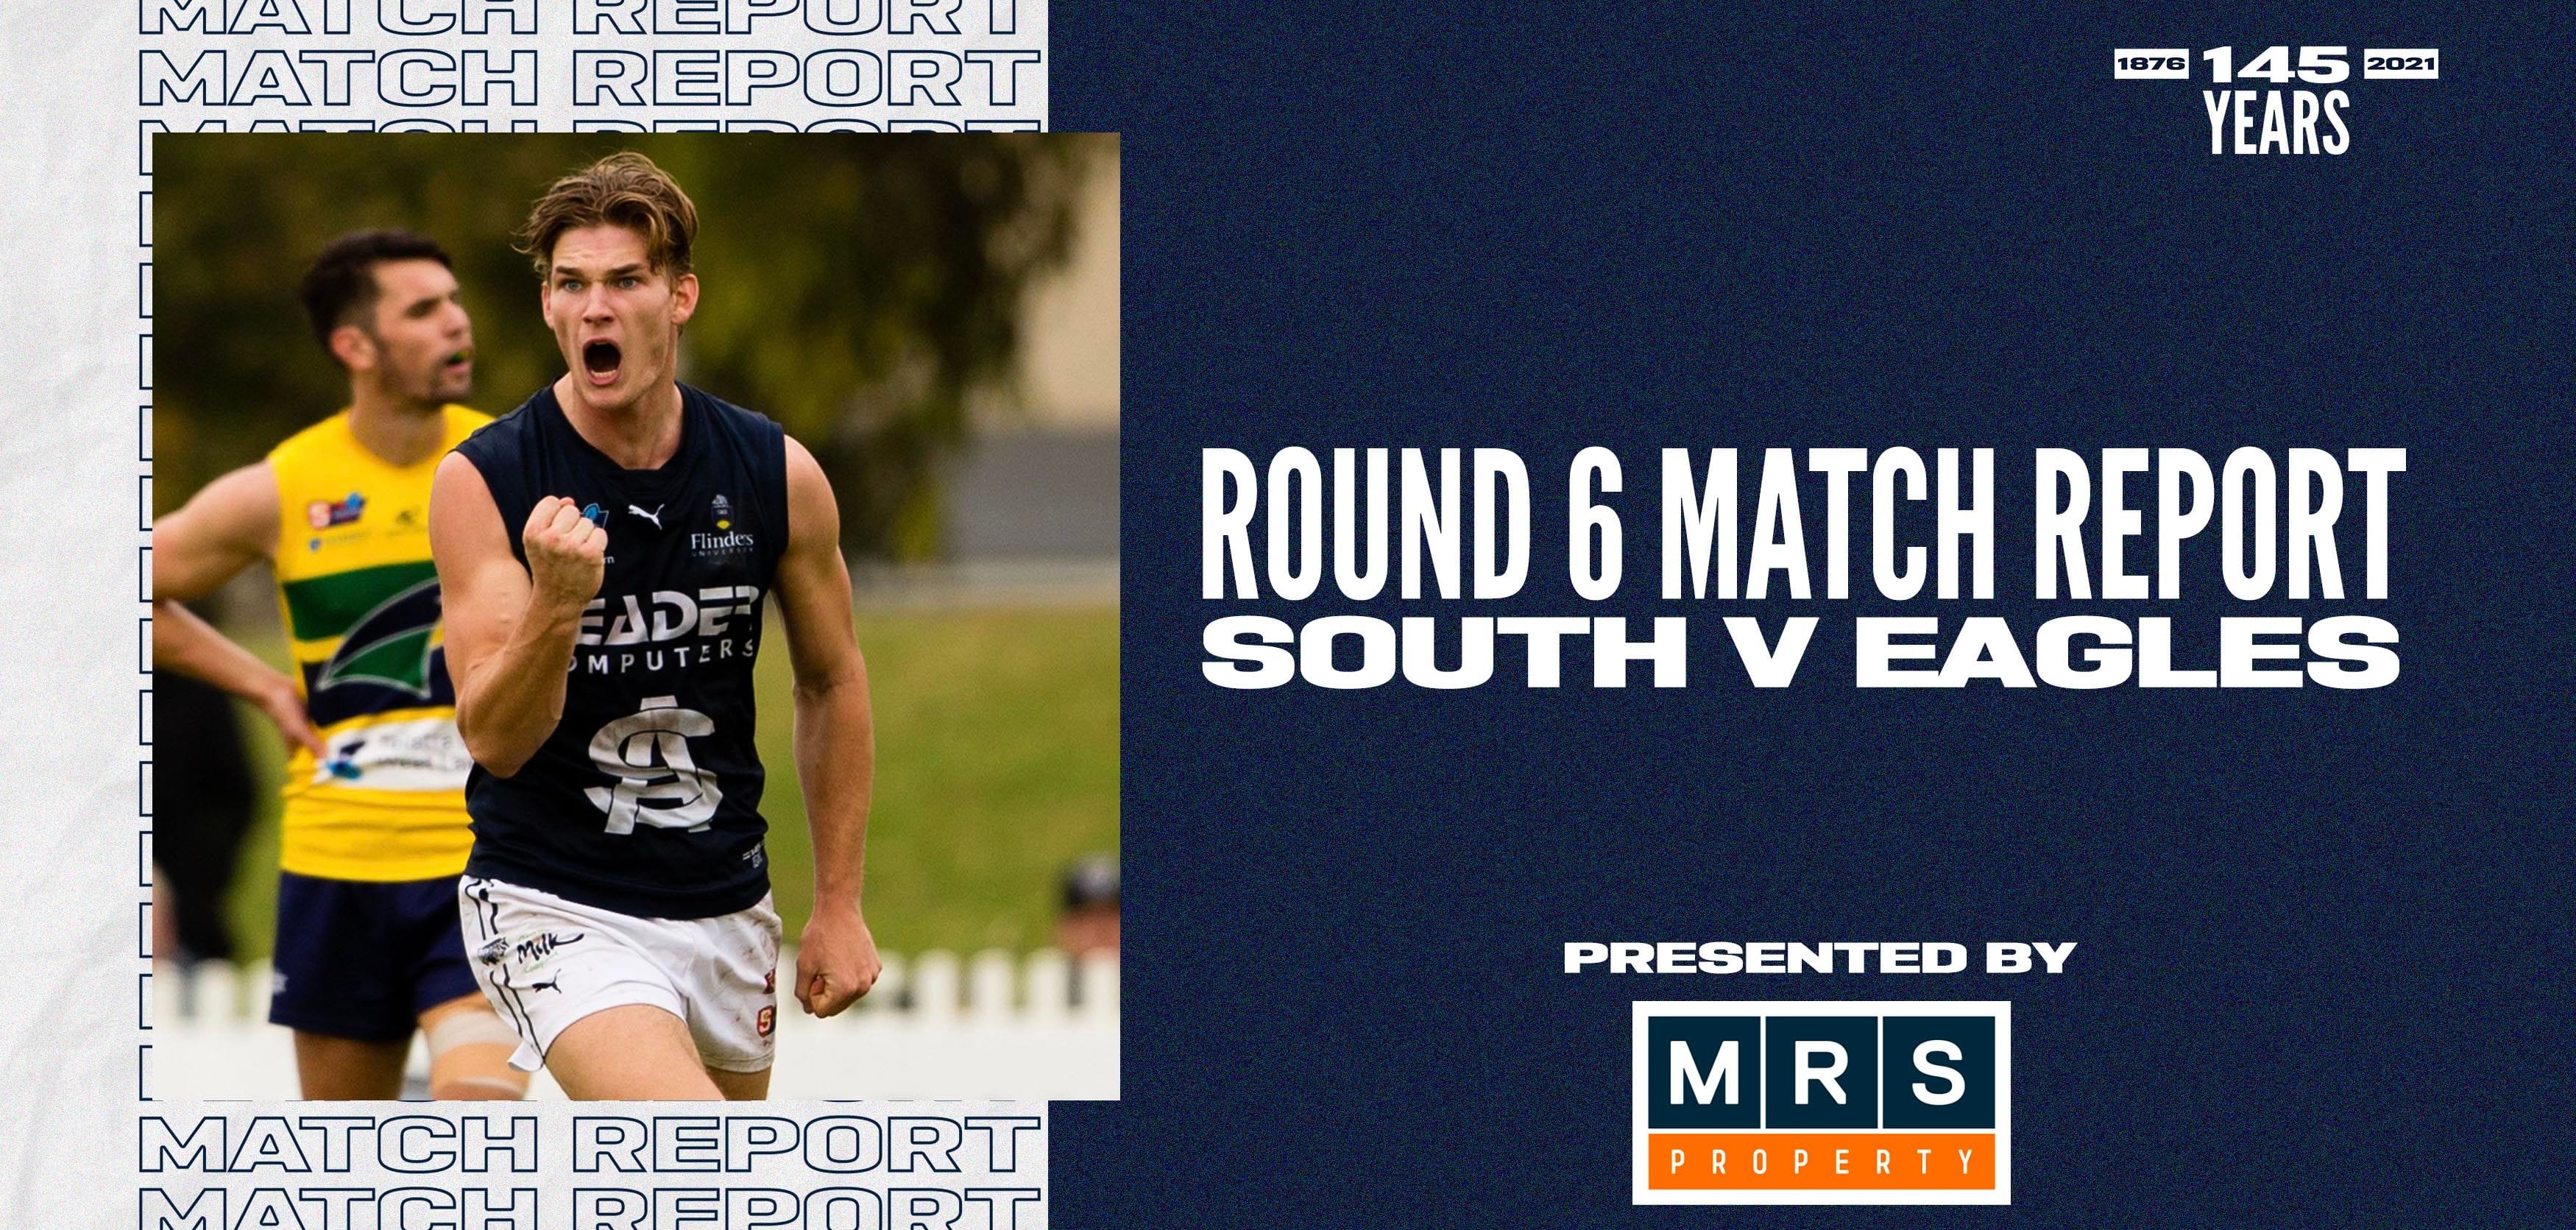 MRS Property Match Report Round 6: vs Eagles